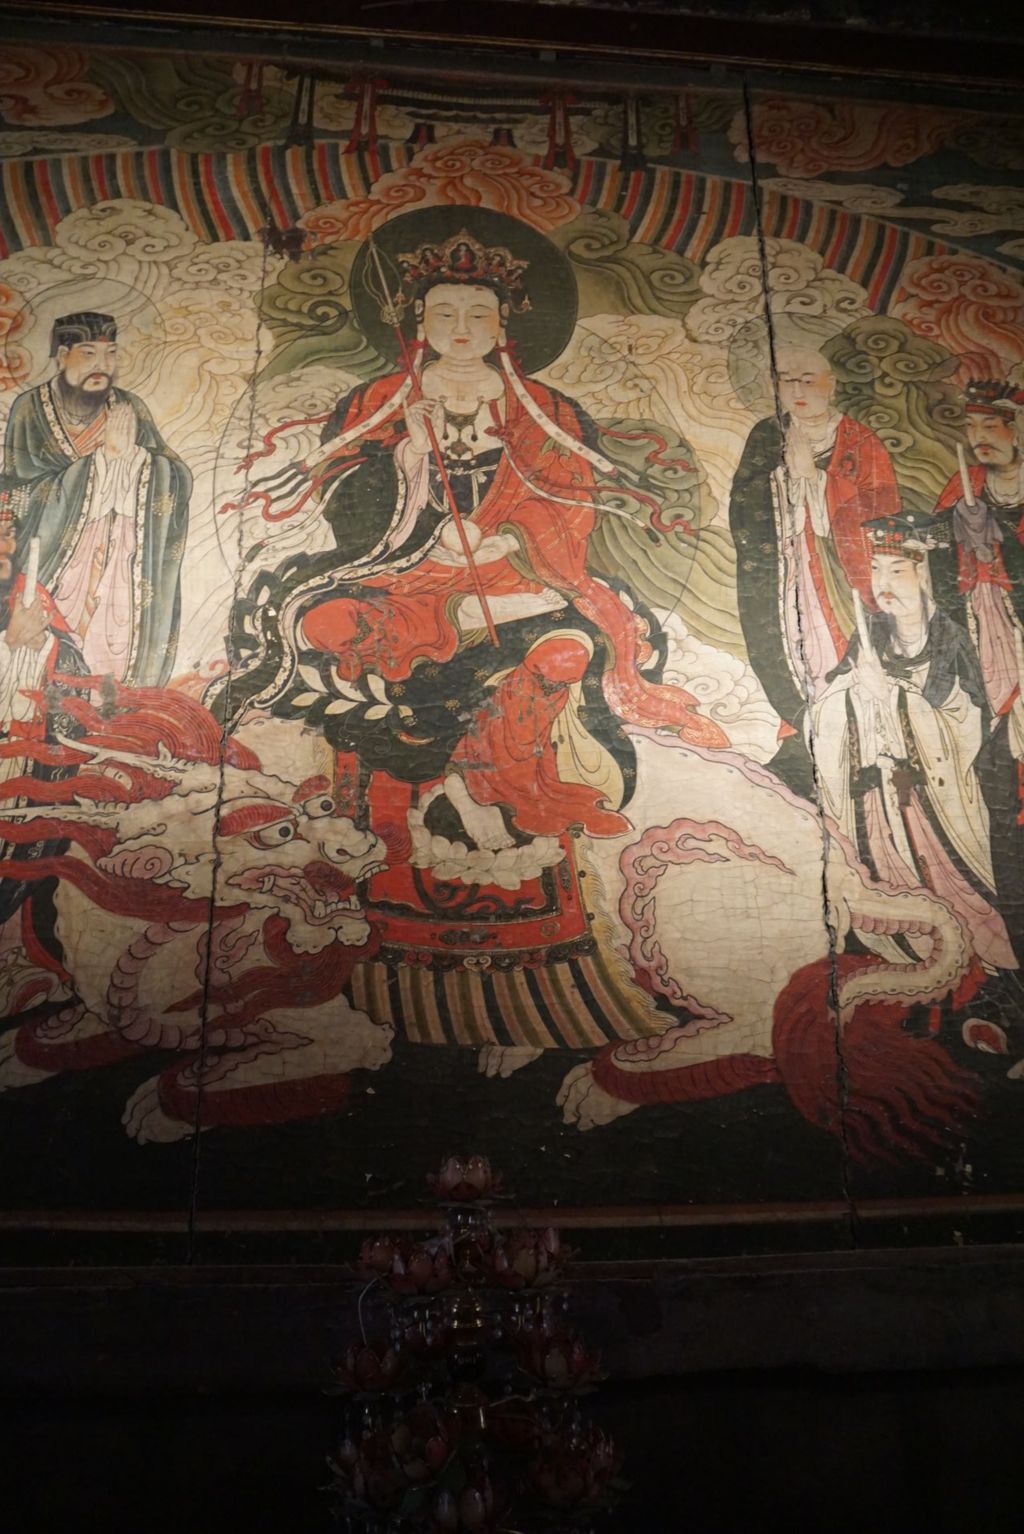 Miniature of Dizang Bodhisattva with the Ten Kings of Hell Mural from Zhihua Hall (Zhihuadian, Hall of Transforming Wisdom), full mural